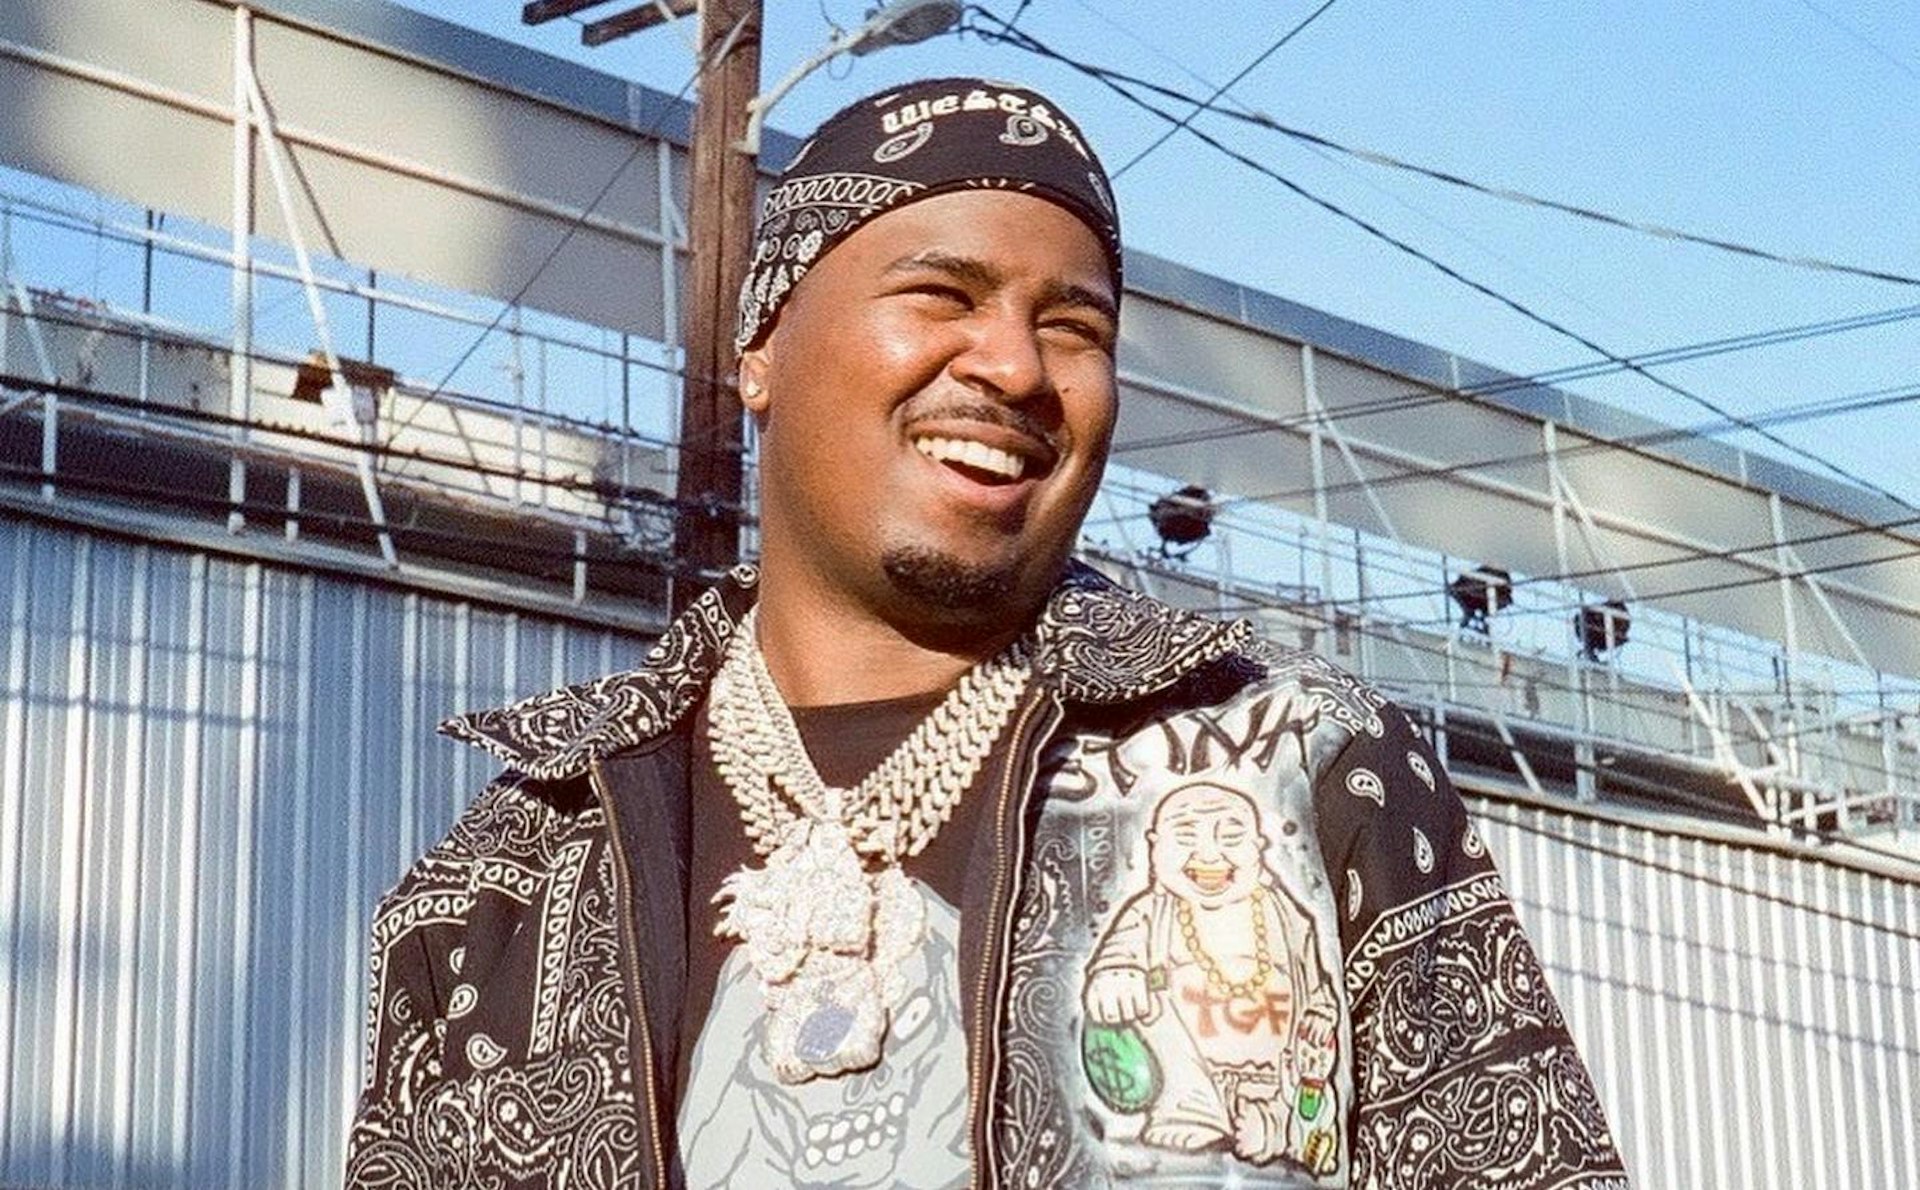 Drakeo The Ruler’s reign has only just begun